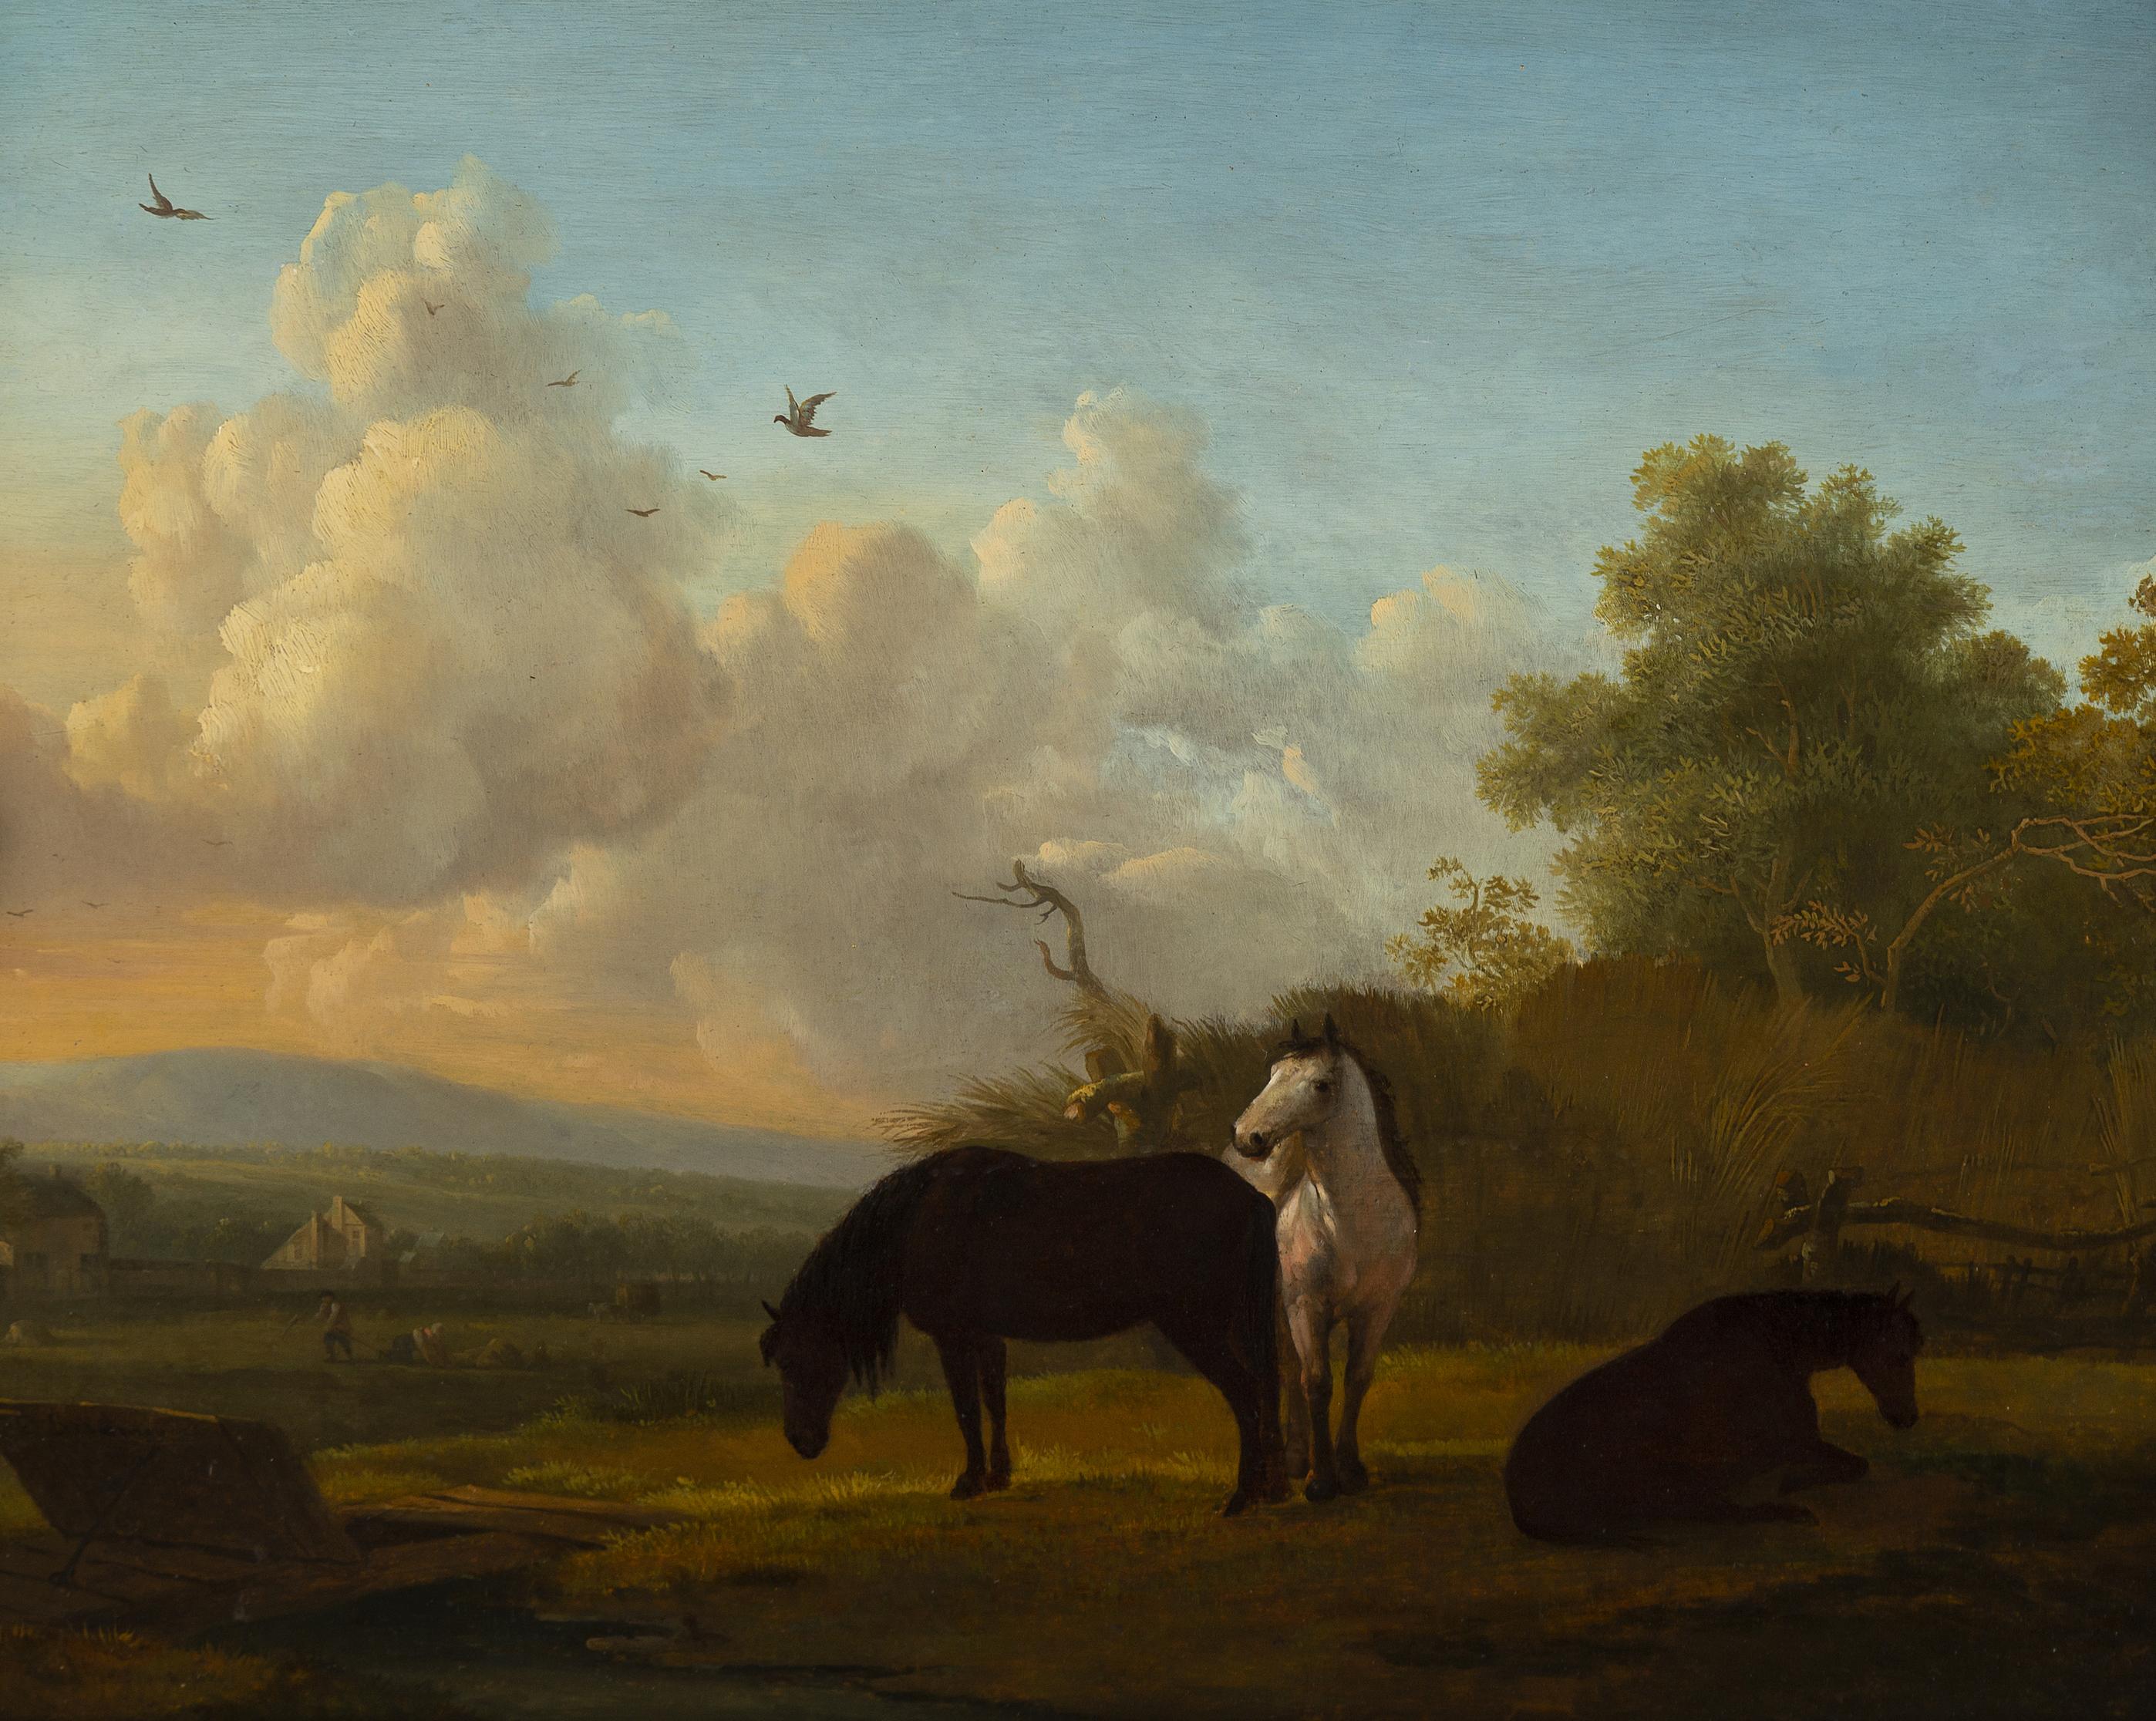 Edmund Bristow Animal Painting - Horses Grazing by a Stream, 19th century.